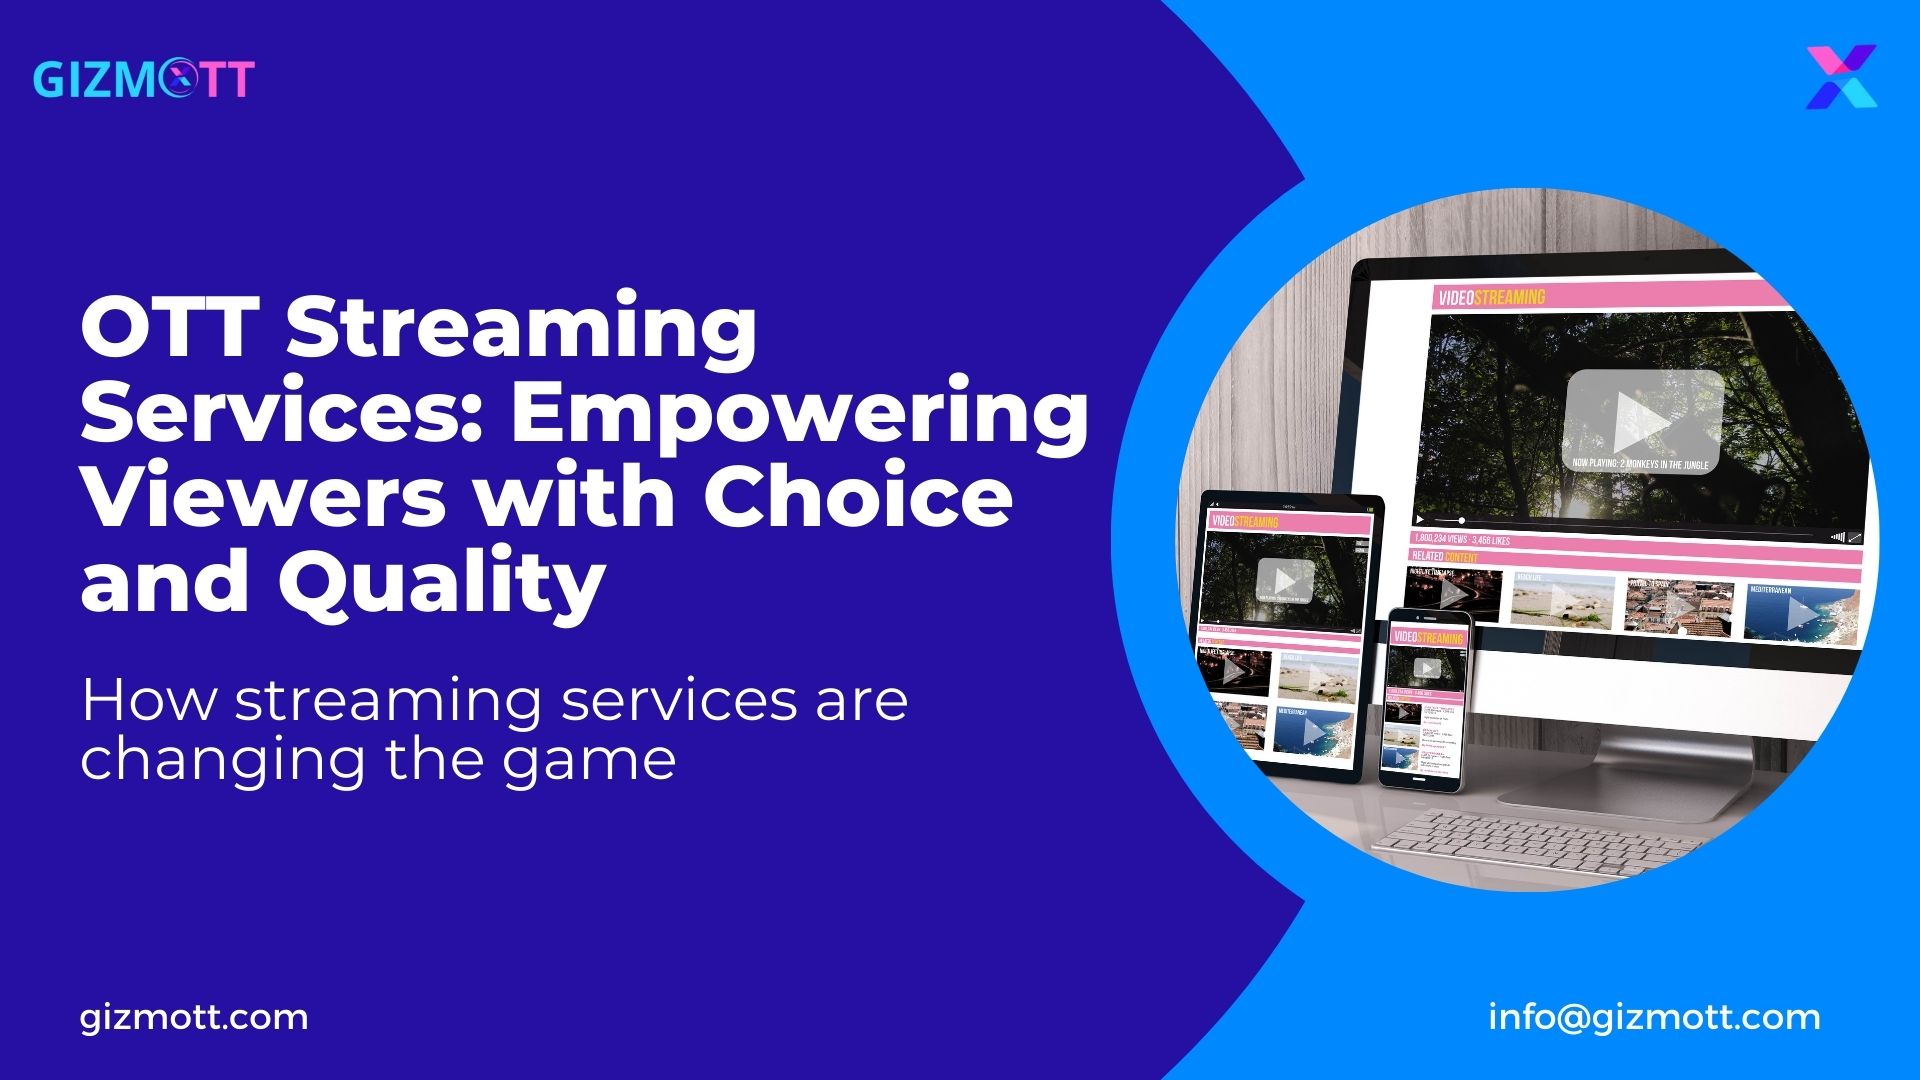 OTT Streaming Services: Empowering Viewers with Choice and Quality